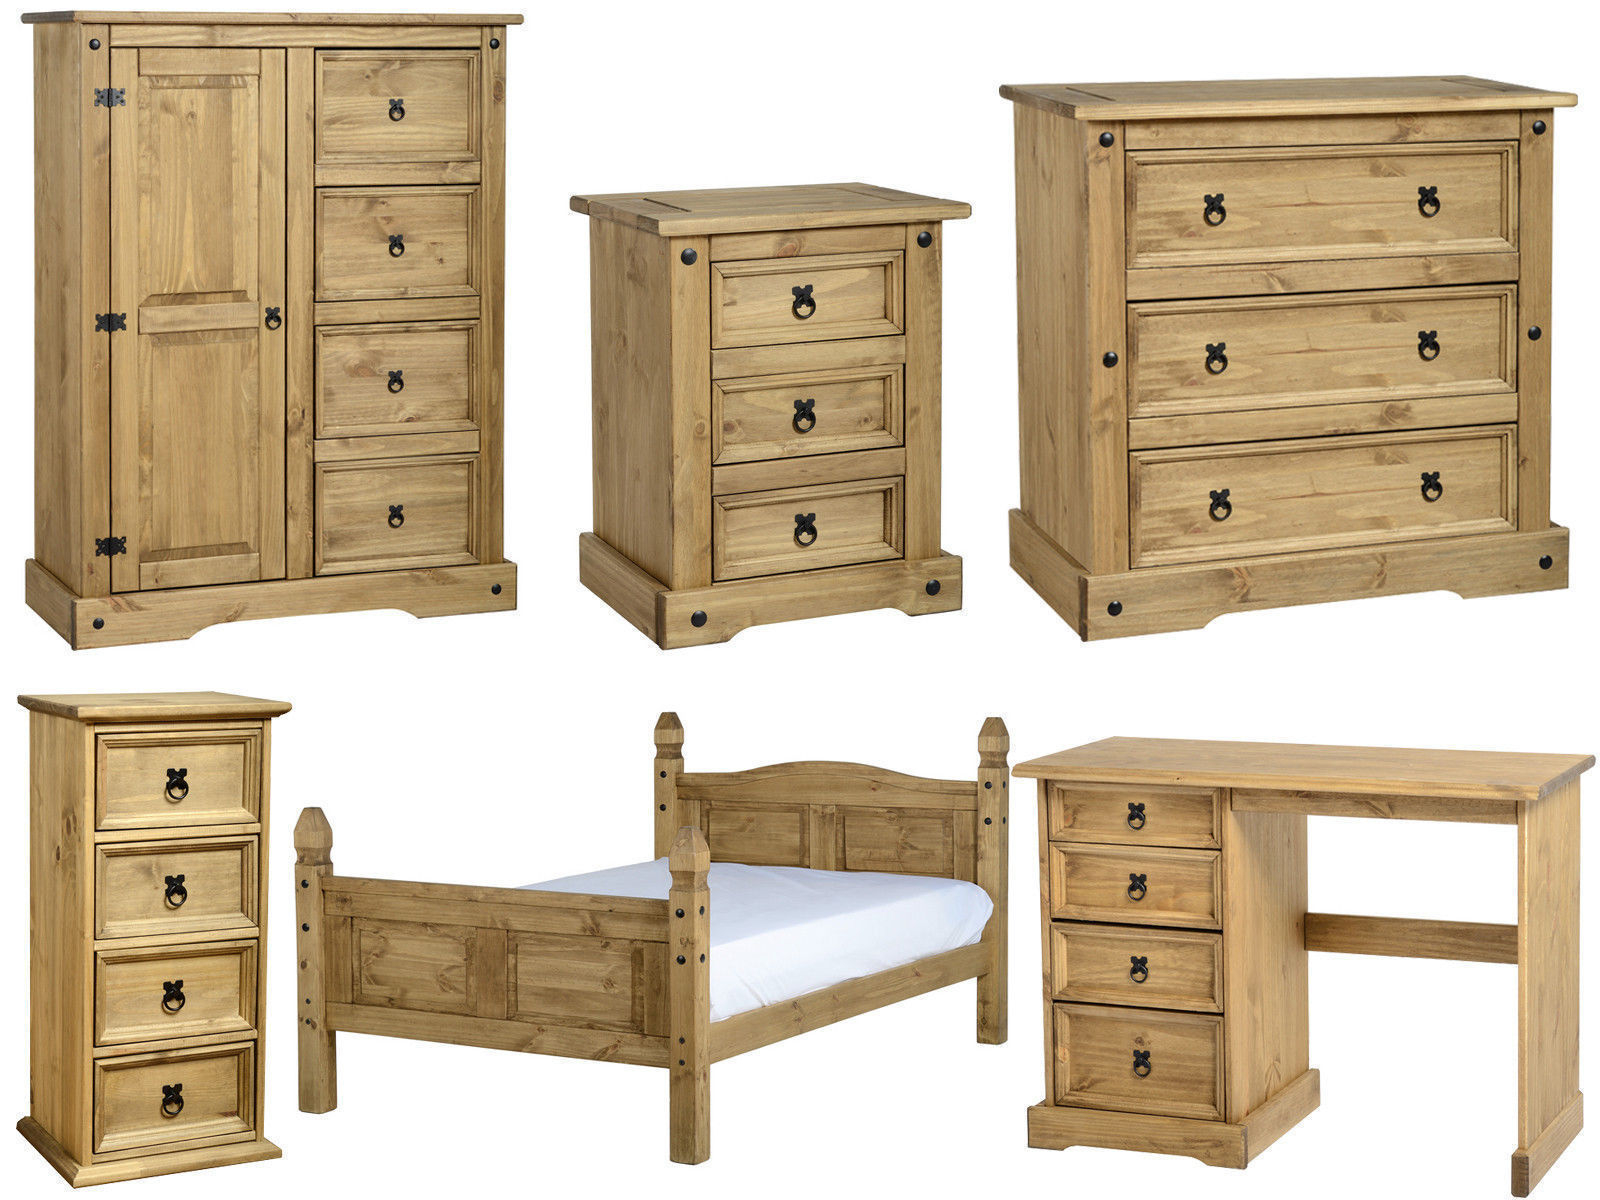 Details About Original Corona Pine Bedroom Furniture Range Waxed Mexican Pine Seconique within sizing 1600 X 1200